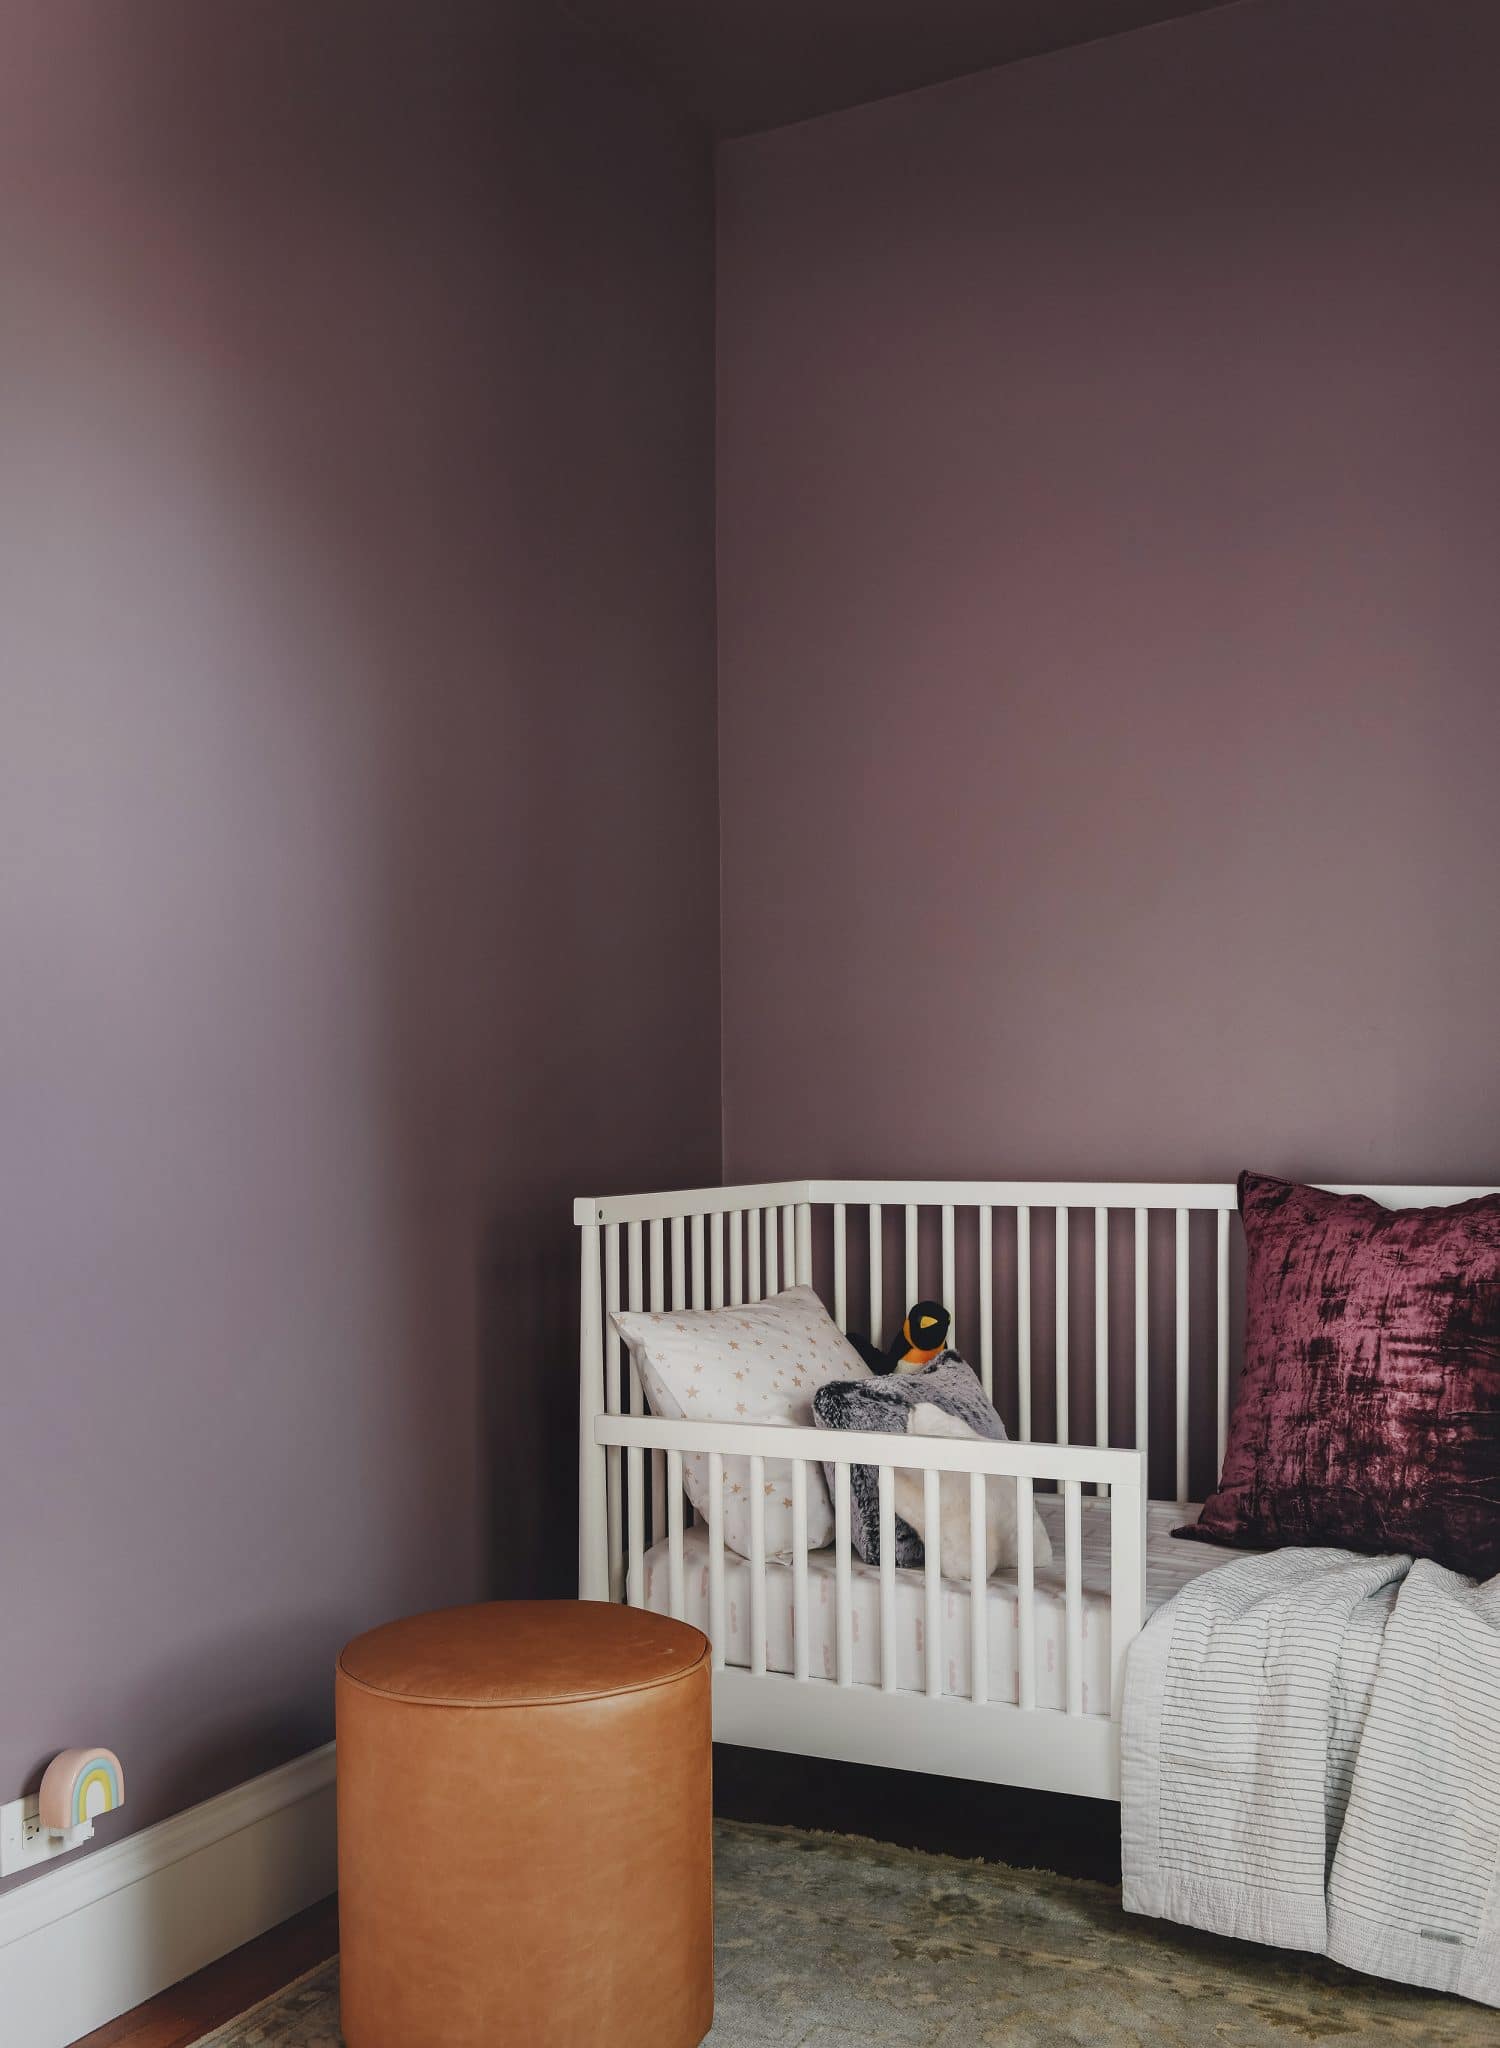 Lucy's bed with purple walls and a leathr ottoman | color is Valspar Mellow Mauve 1004-7C | via Yellow Brick Home